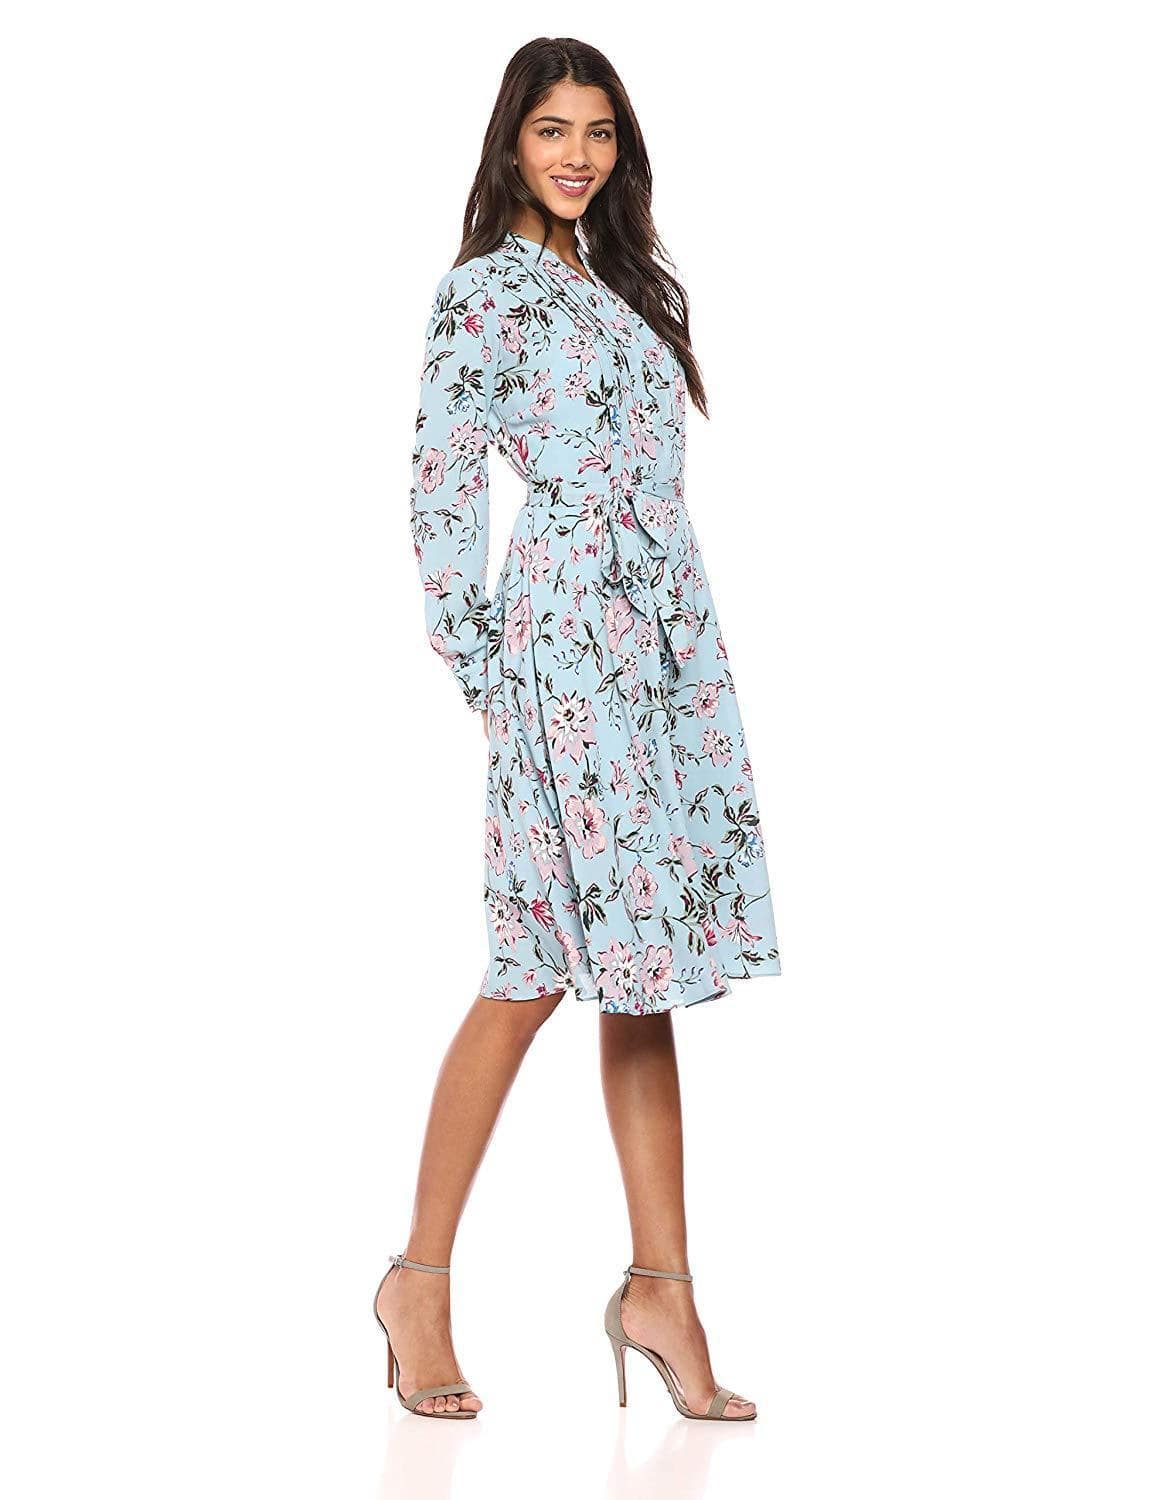 Nanette Nanette Lepore - NM9S171Y9 Long Sleeve Floral Print Dress in Blue and Multi-Color